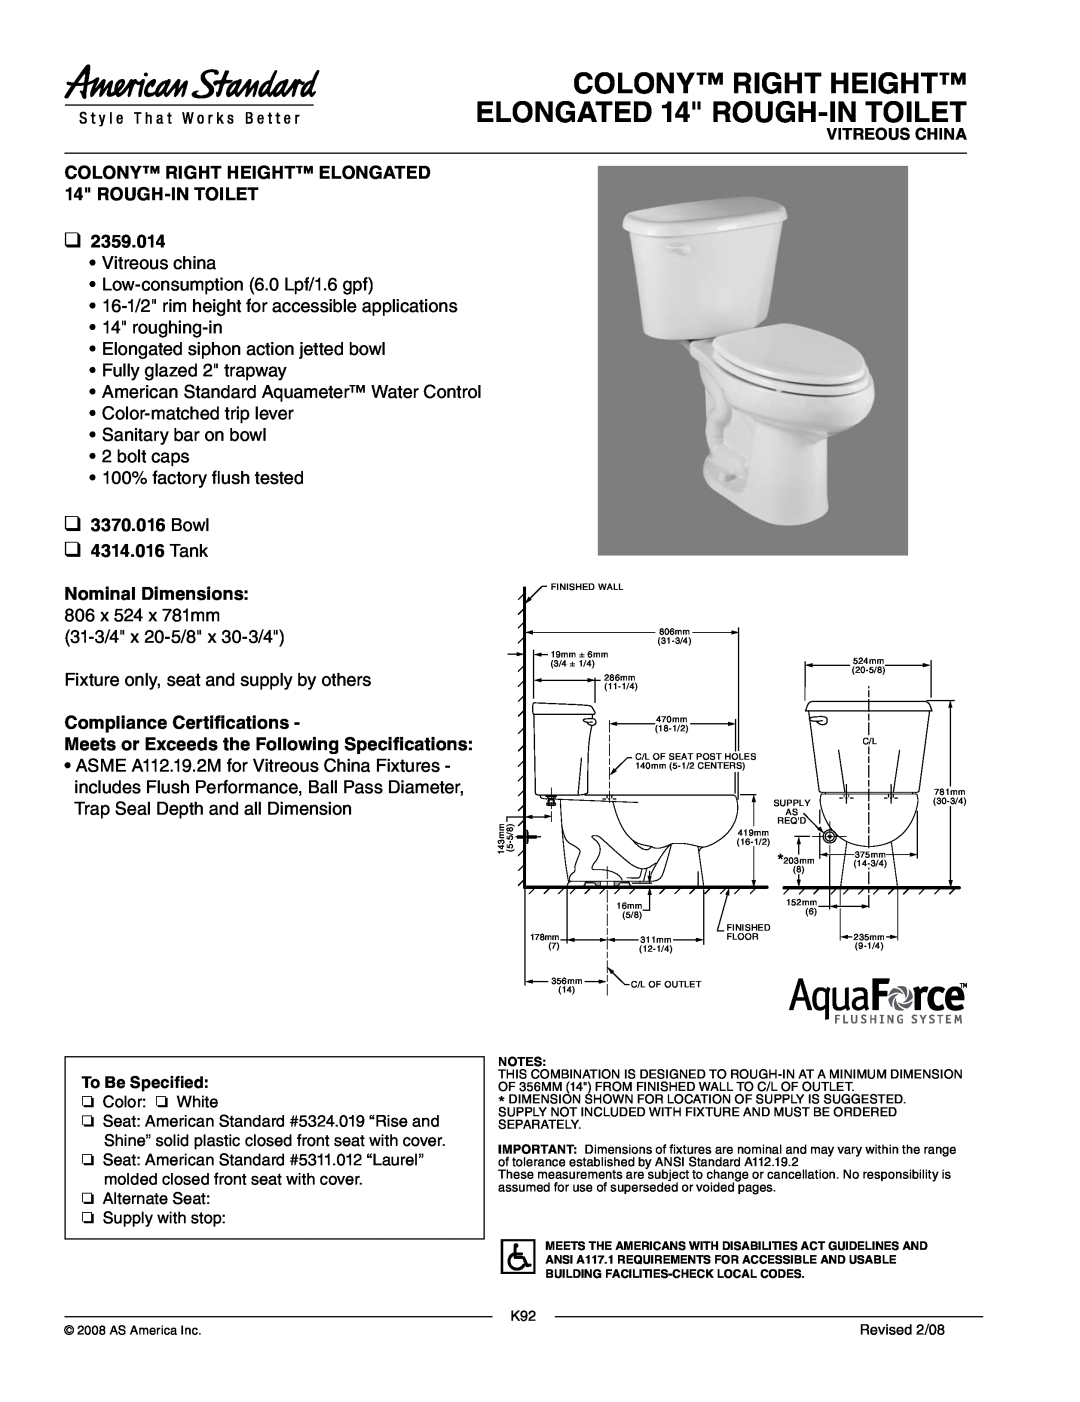 American Standard 2359.014 dimensions COLONY RIGHT HEIGHT ELONGATED 14 ROUGH-INTOILET, Bowl 4314.016 Tank 